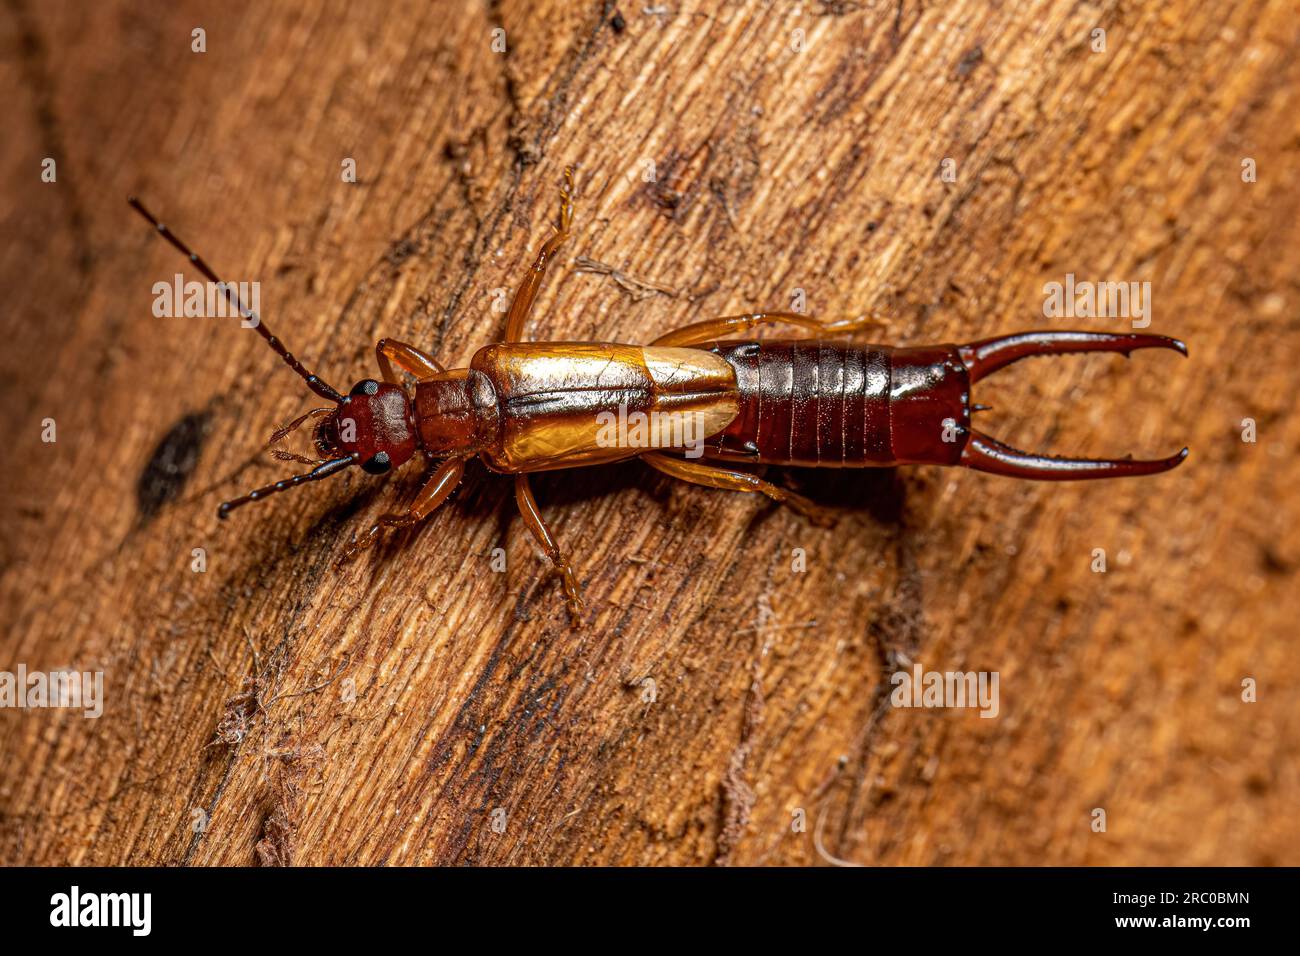 Adult Common Earwig of the order Dermaptera Stock Photo